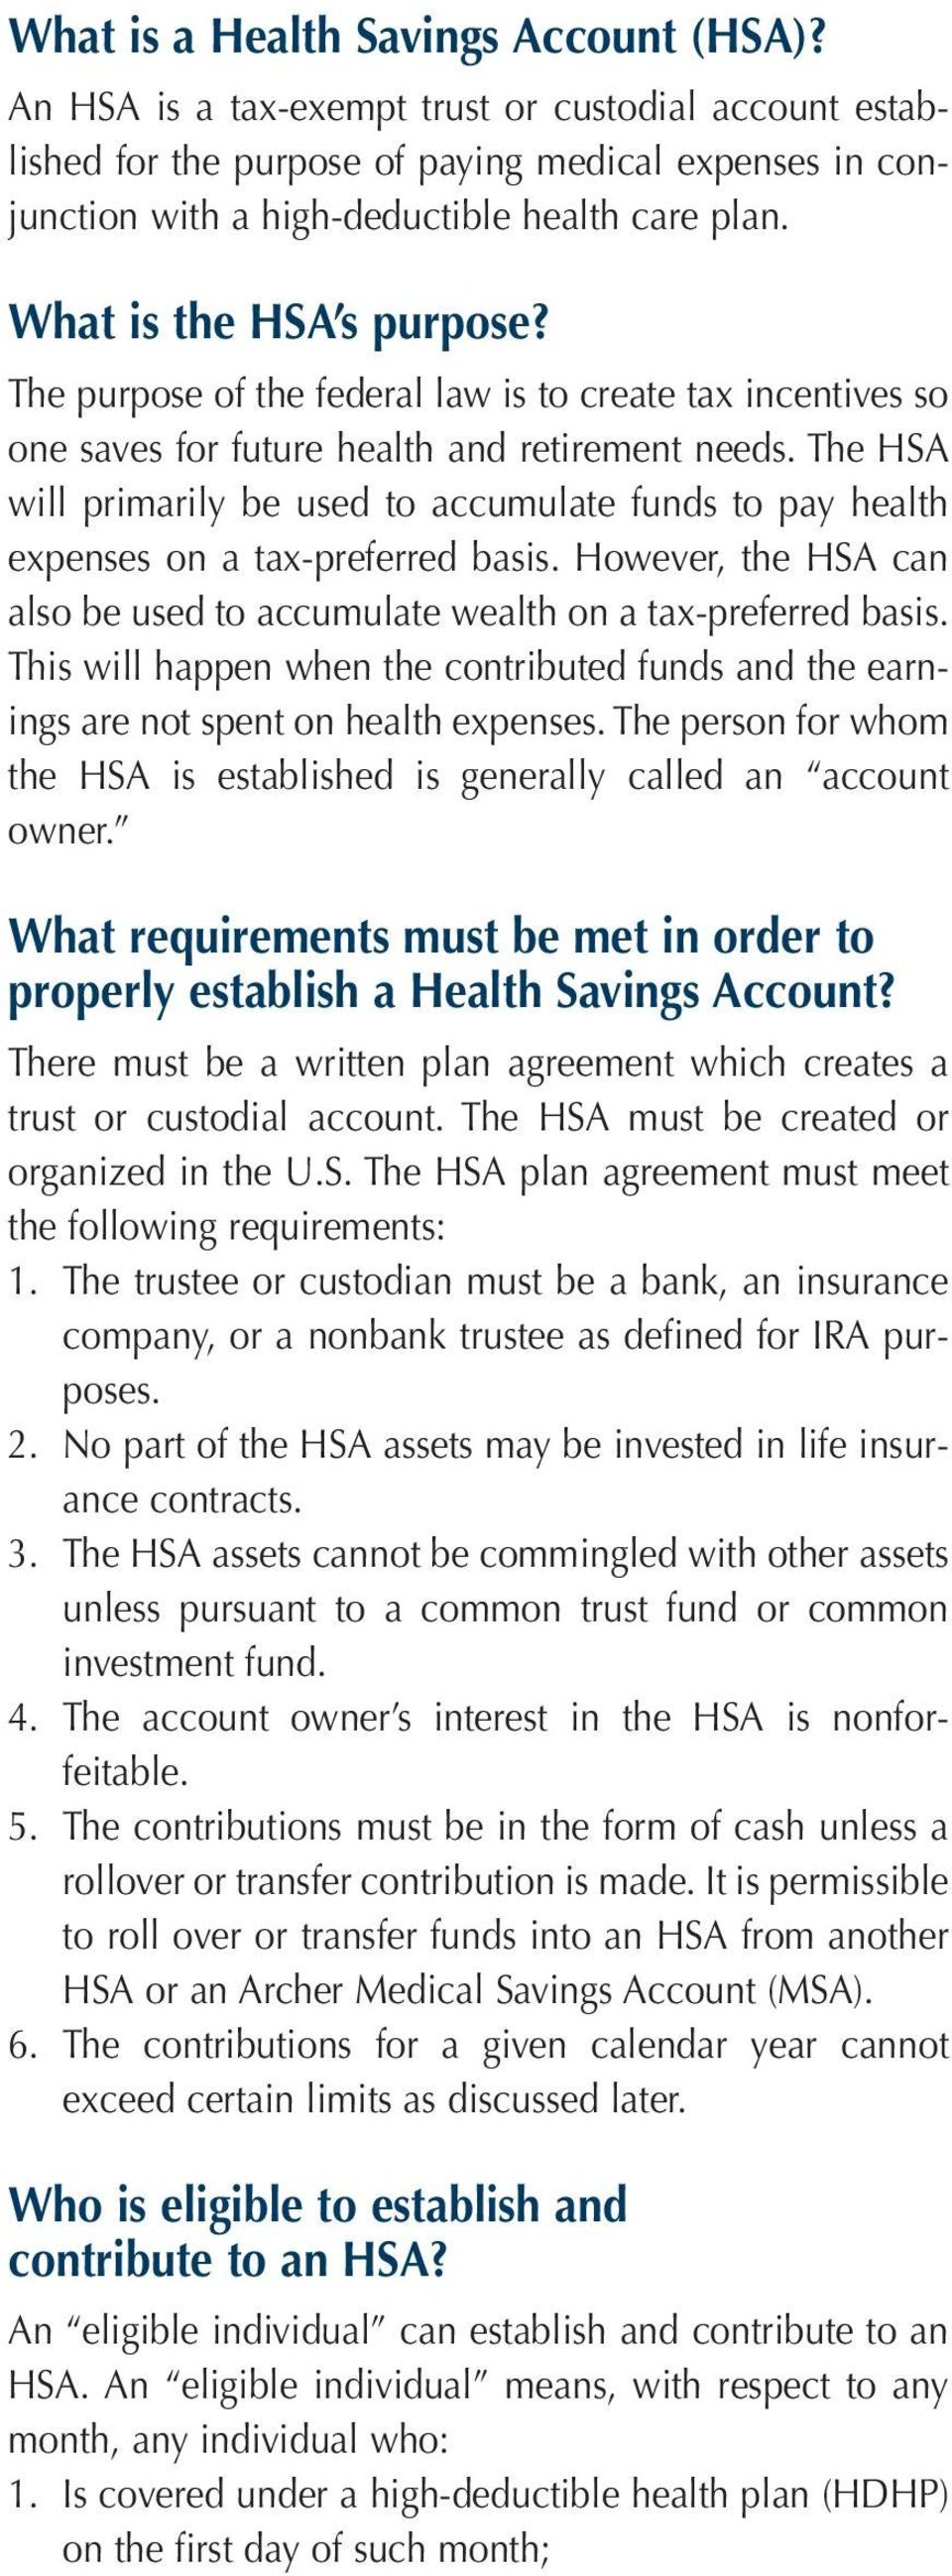 The HSA will primarily be used to accumulate funds to pay health expenses on a tax-preferred basis. However, the HSA can also be used to accumulate wealth on a tax-preferred basis.